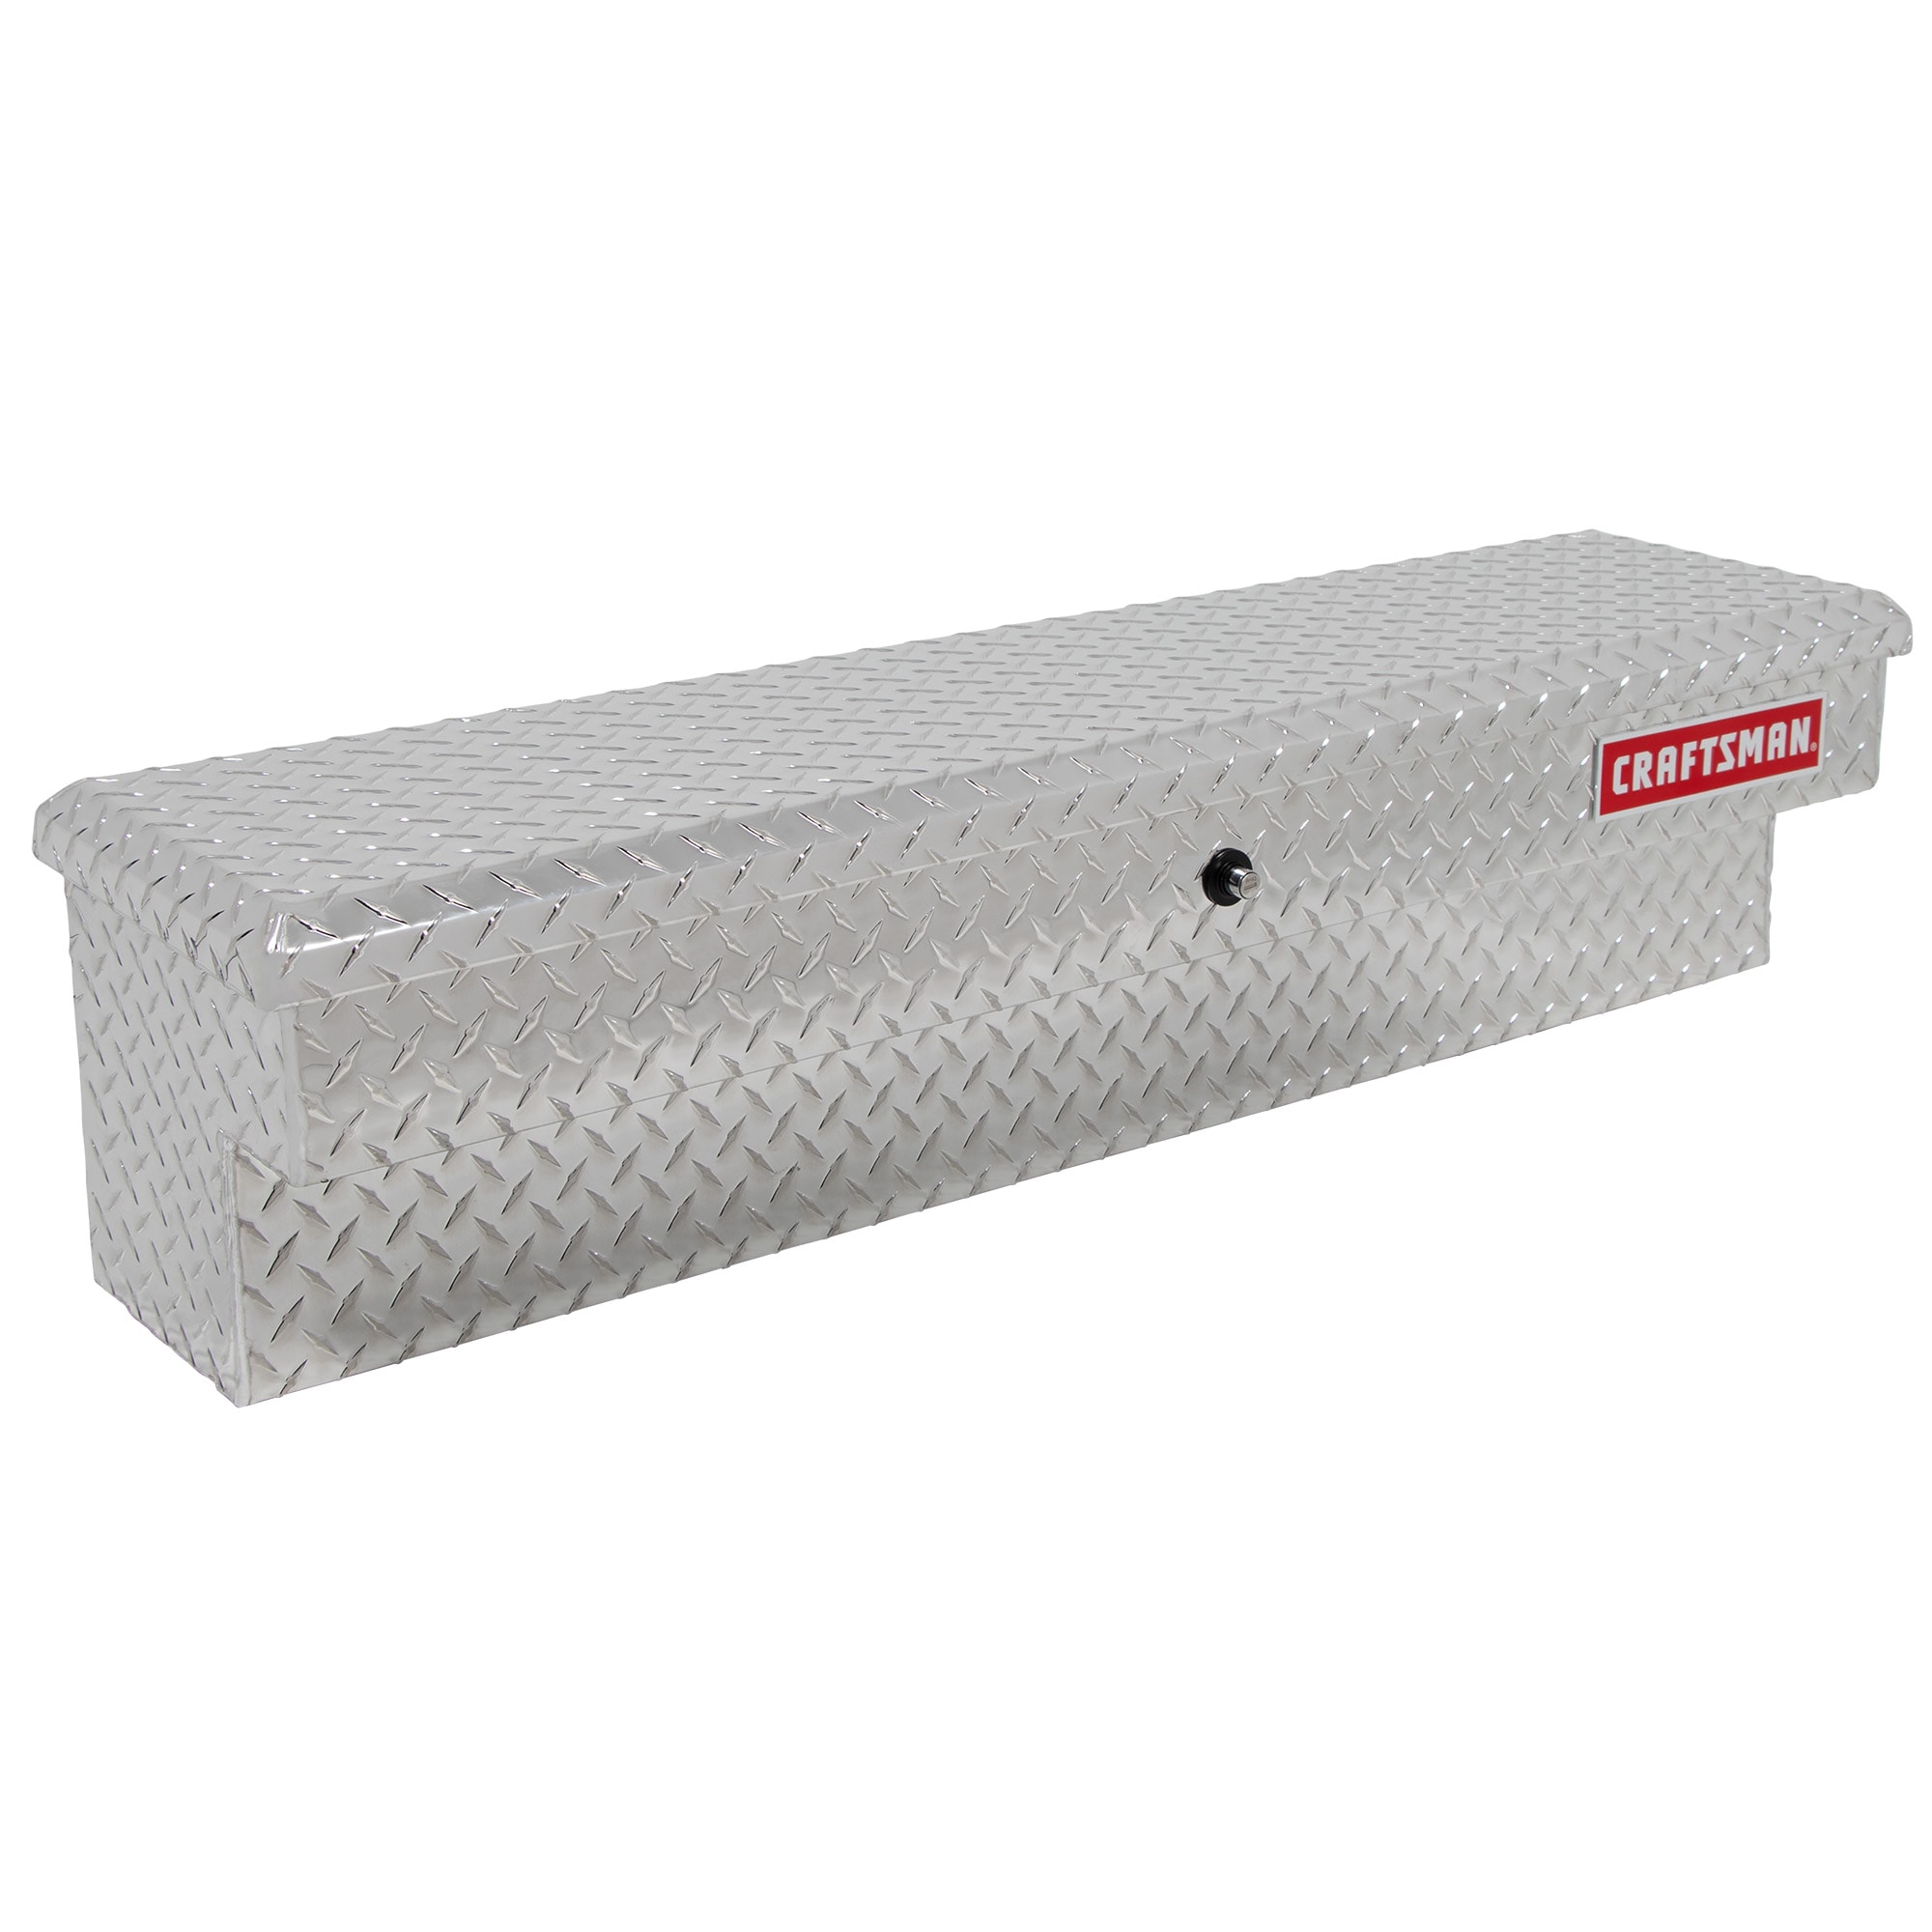 48-in x 11.5-in x 11-in Silver Aluminum Side Mount Truck Tool Box | - CRAFTSMAN CMXTBAD63017205